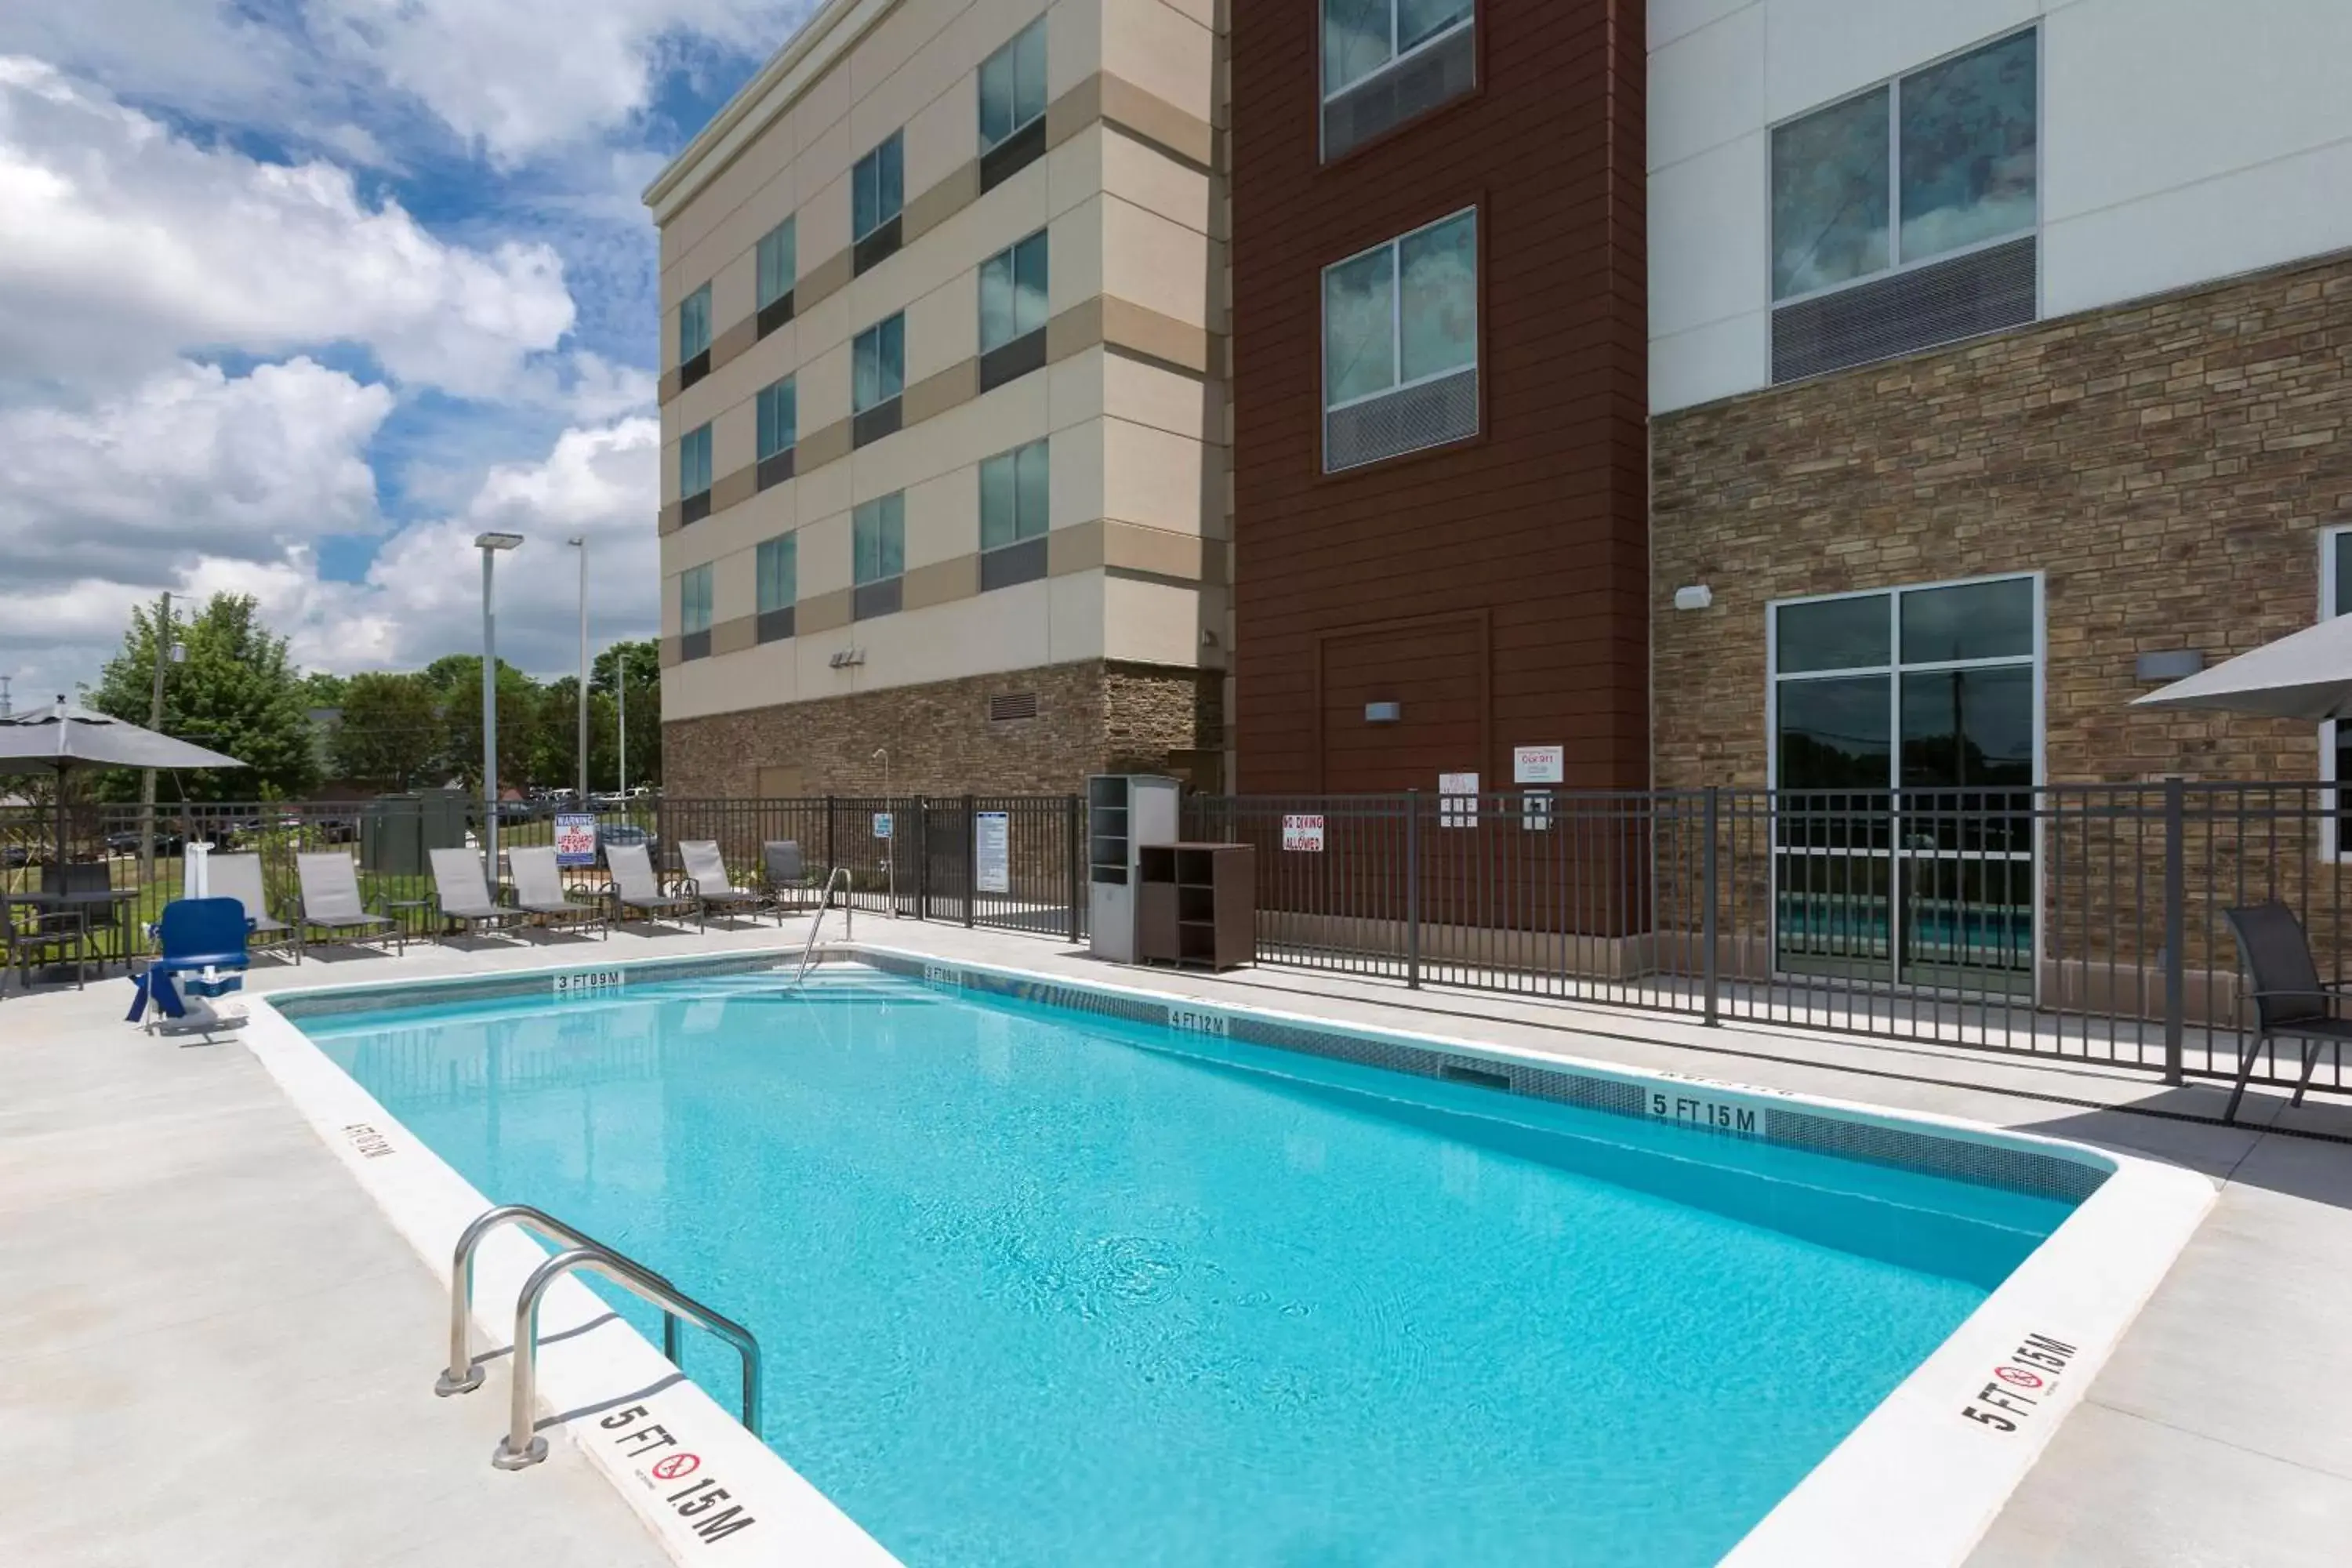 Swimming Pool in Fairfield by Marriott Inn & Suites Statesville